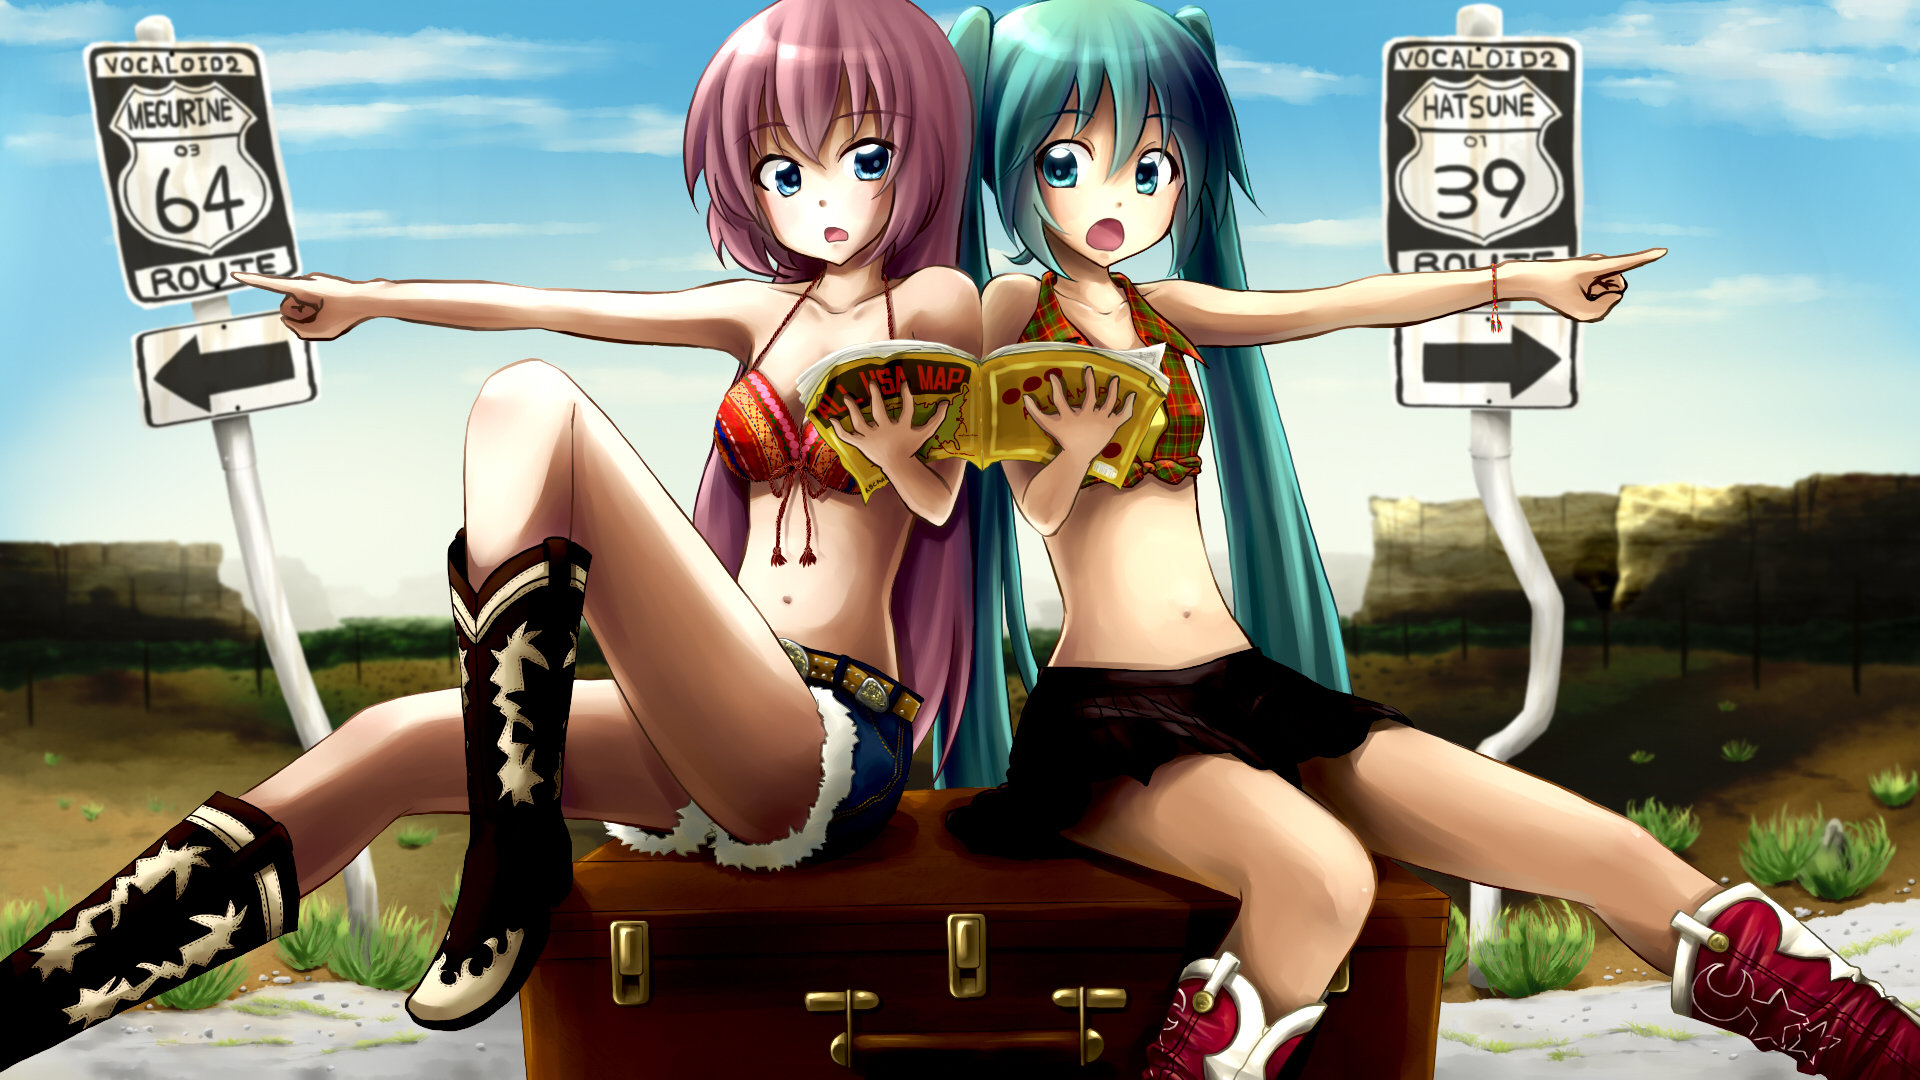 Download hd 1920x1080 Vocaloid desktop background ID:605 for free